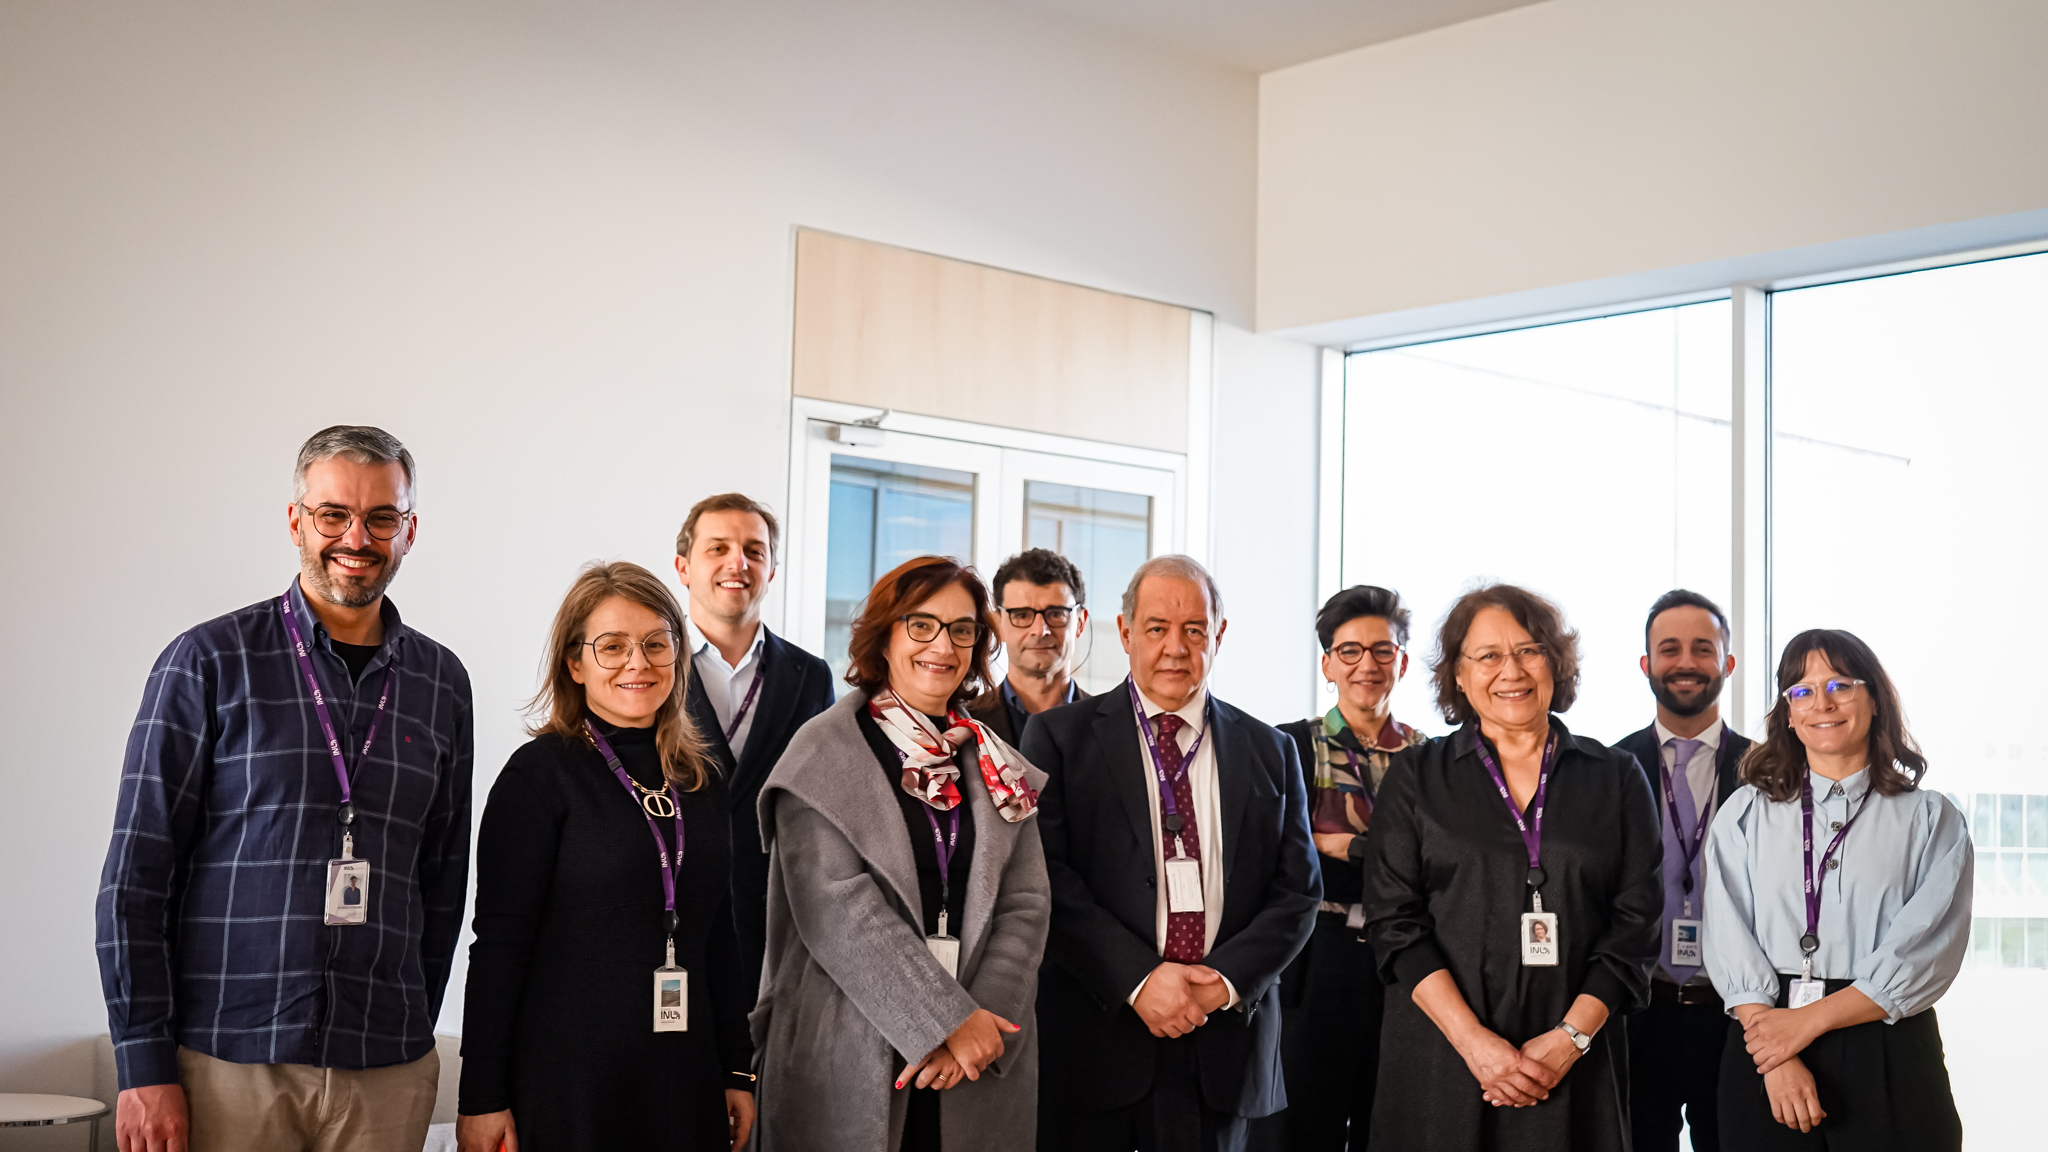 Portugal’s Ministers Elvira Fortunato and António Costa Silva visited INL today